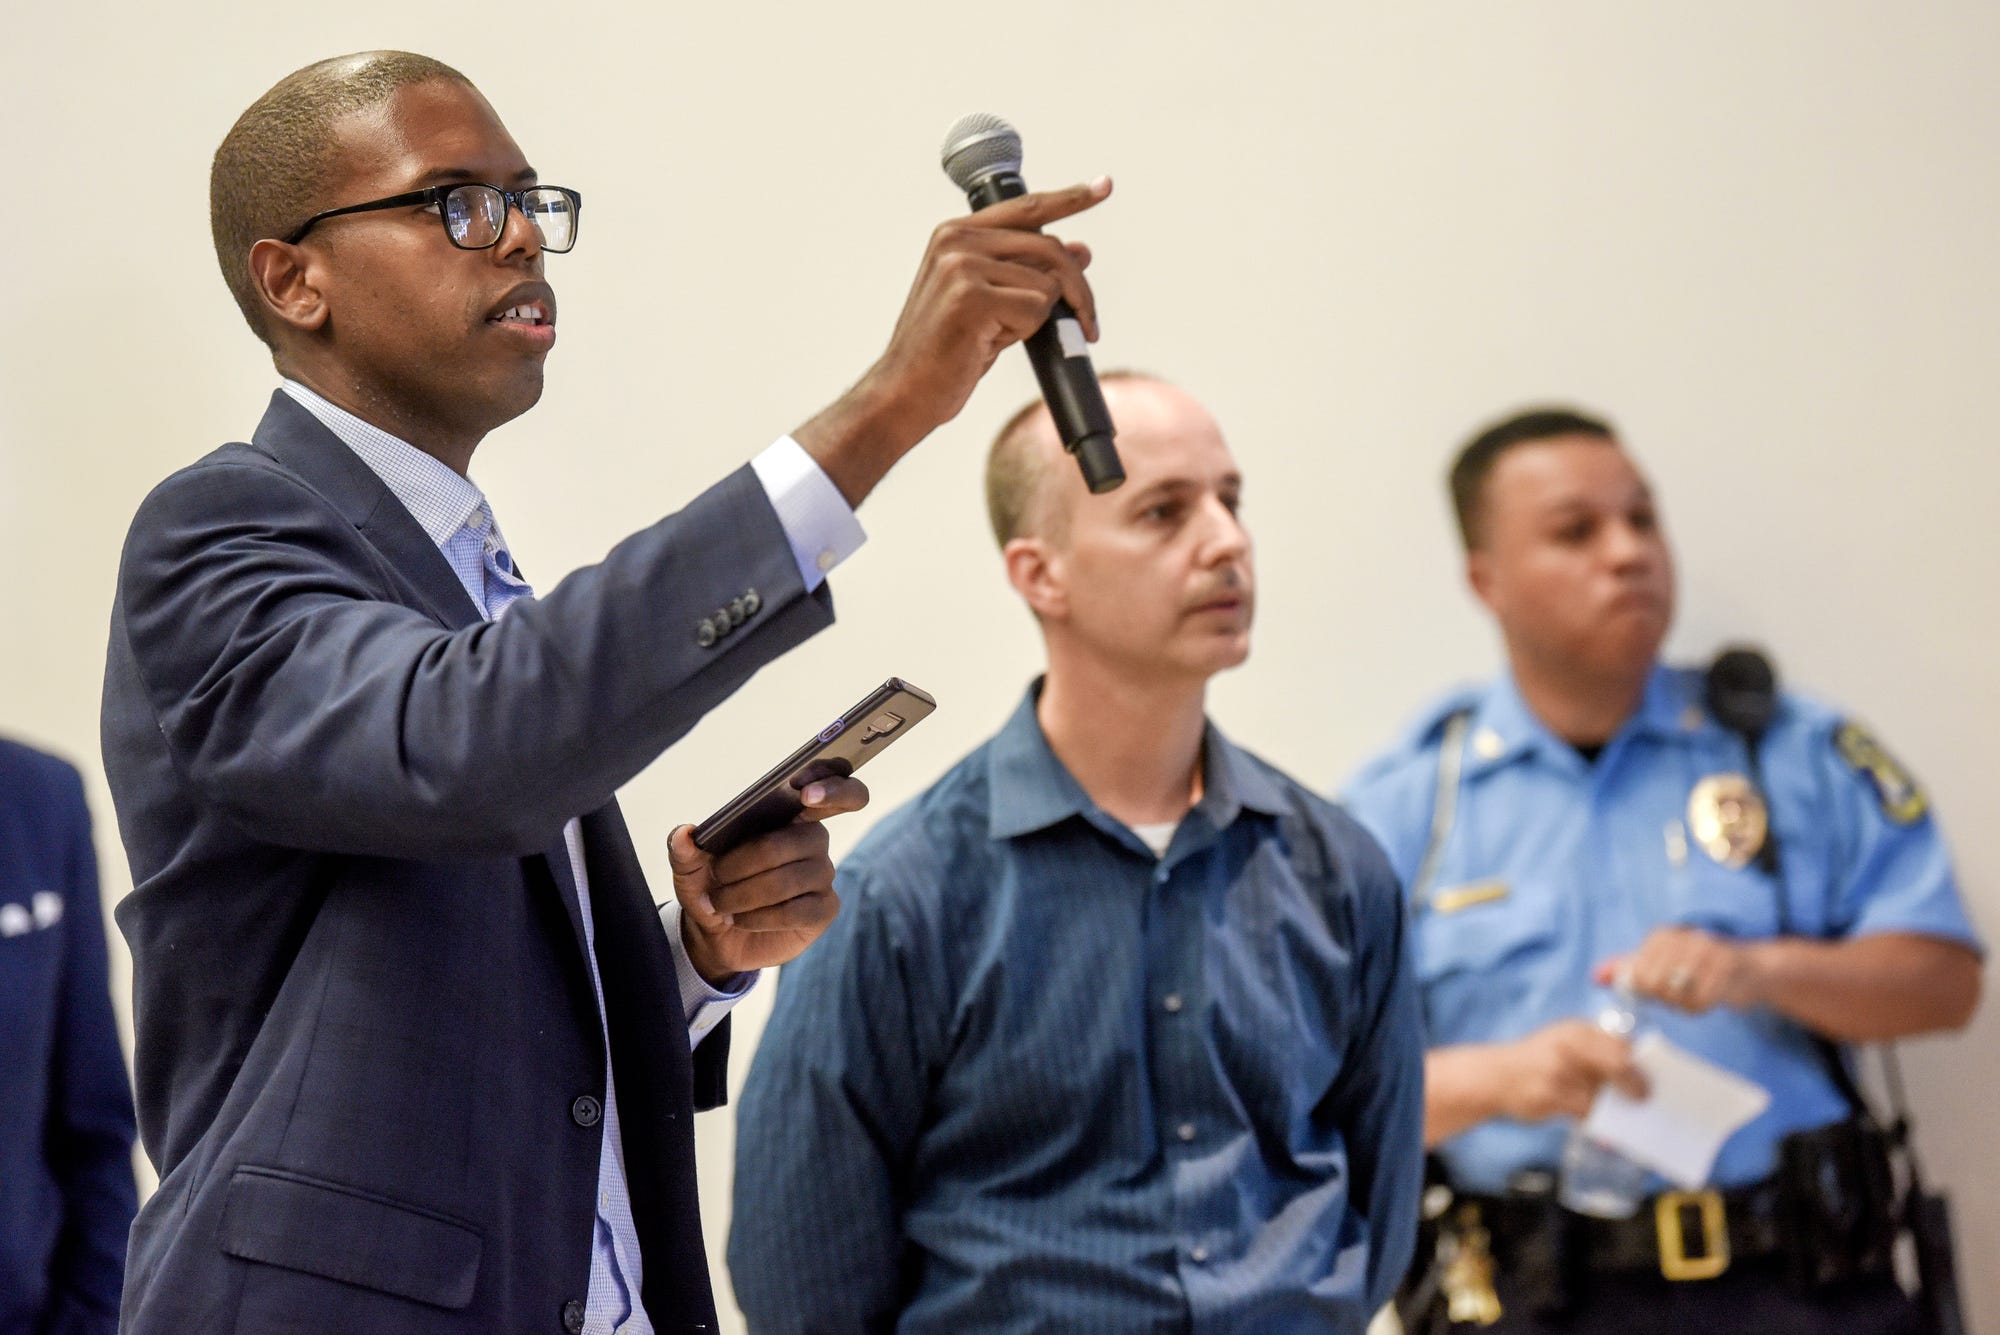 Ingham County Commissioner Derrell Slaughter calls on a person to speak during a gun violence meeting at city hall on Thursday, Aug. 8, 2019, in Lansing.